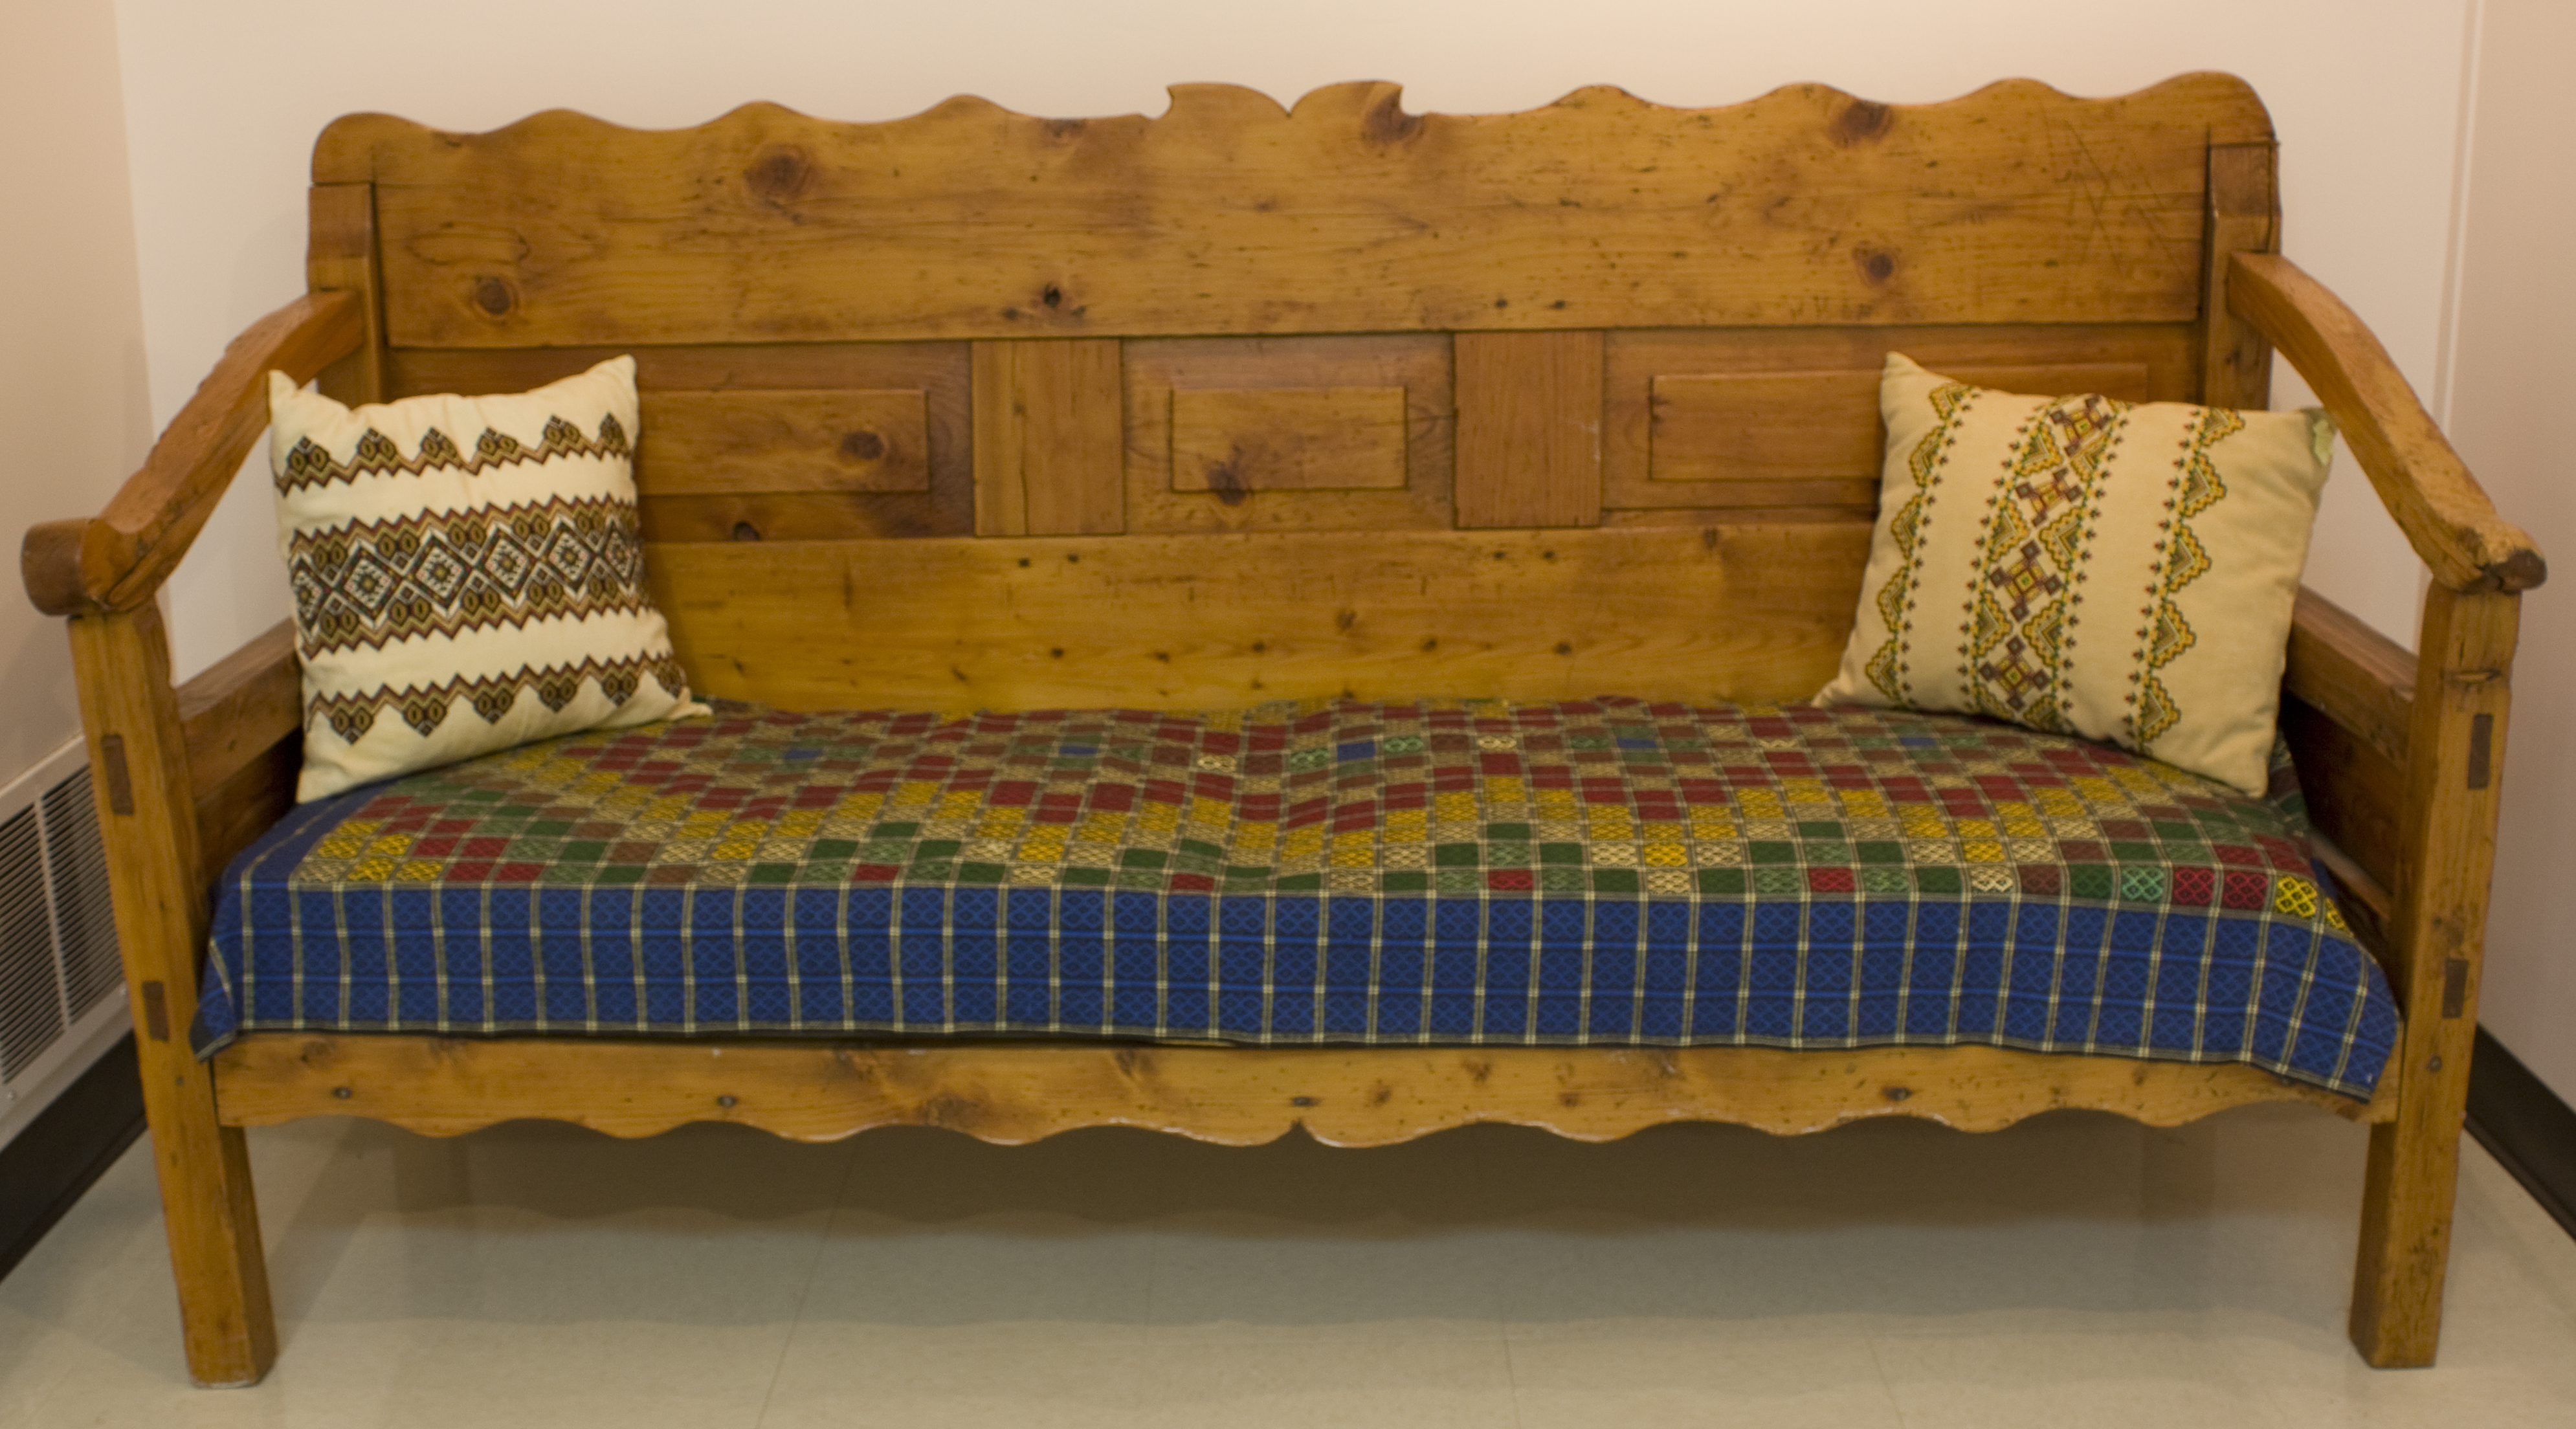 Bembetel (sofa), made with no nailes over 100 years ago in Manitoba.